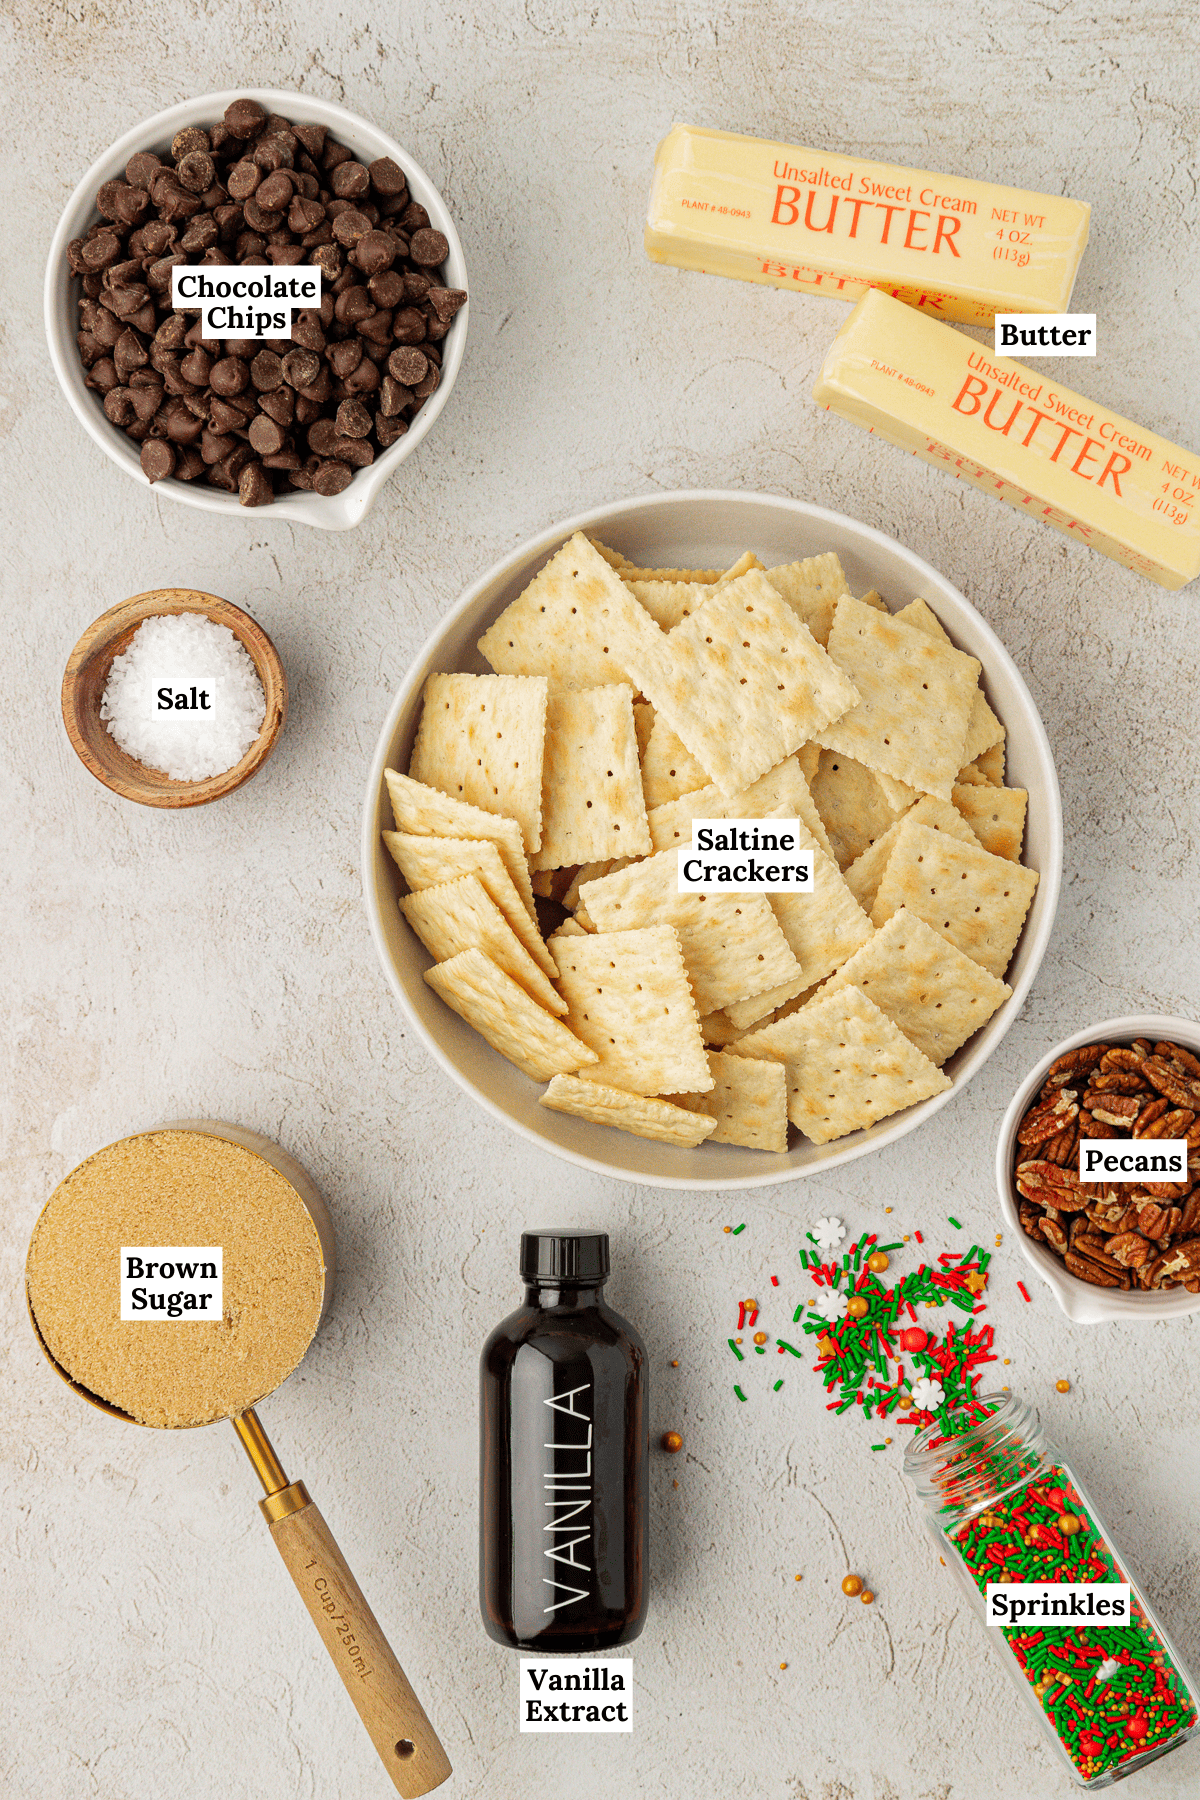 overhead view of ingredients for christmas crack including a bowl of saltine crackers, a measuring cup of brown sugar, a bowl of semi-sweet chocolate chips, a small bowl of sea salt, a bottle of sprinkles laying on its side with some spilled out, two sticks of butter, and a small bowl of pecans